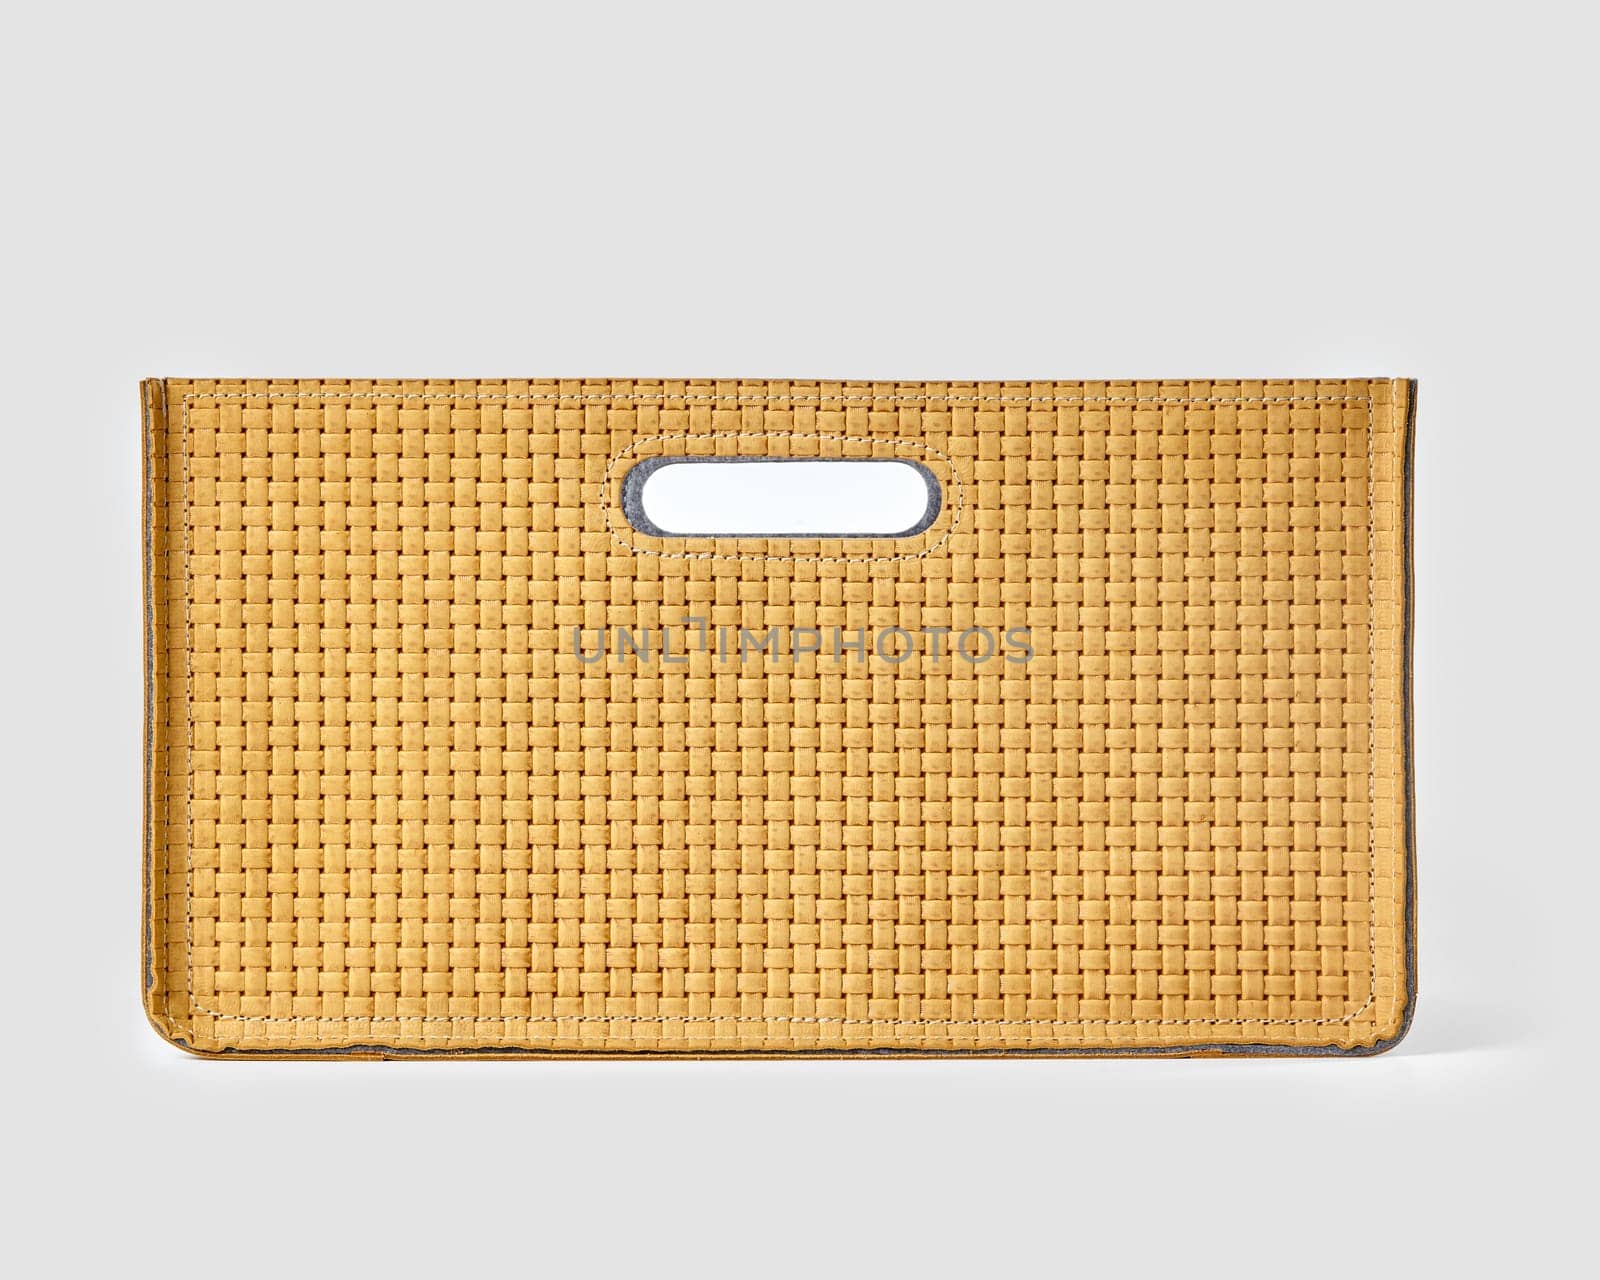 Front view of tan woven suede storage box with sturdy build and convenient slotted handles, ideal for stylishly organizing spaces. Modern craft accessory for interior design